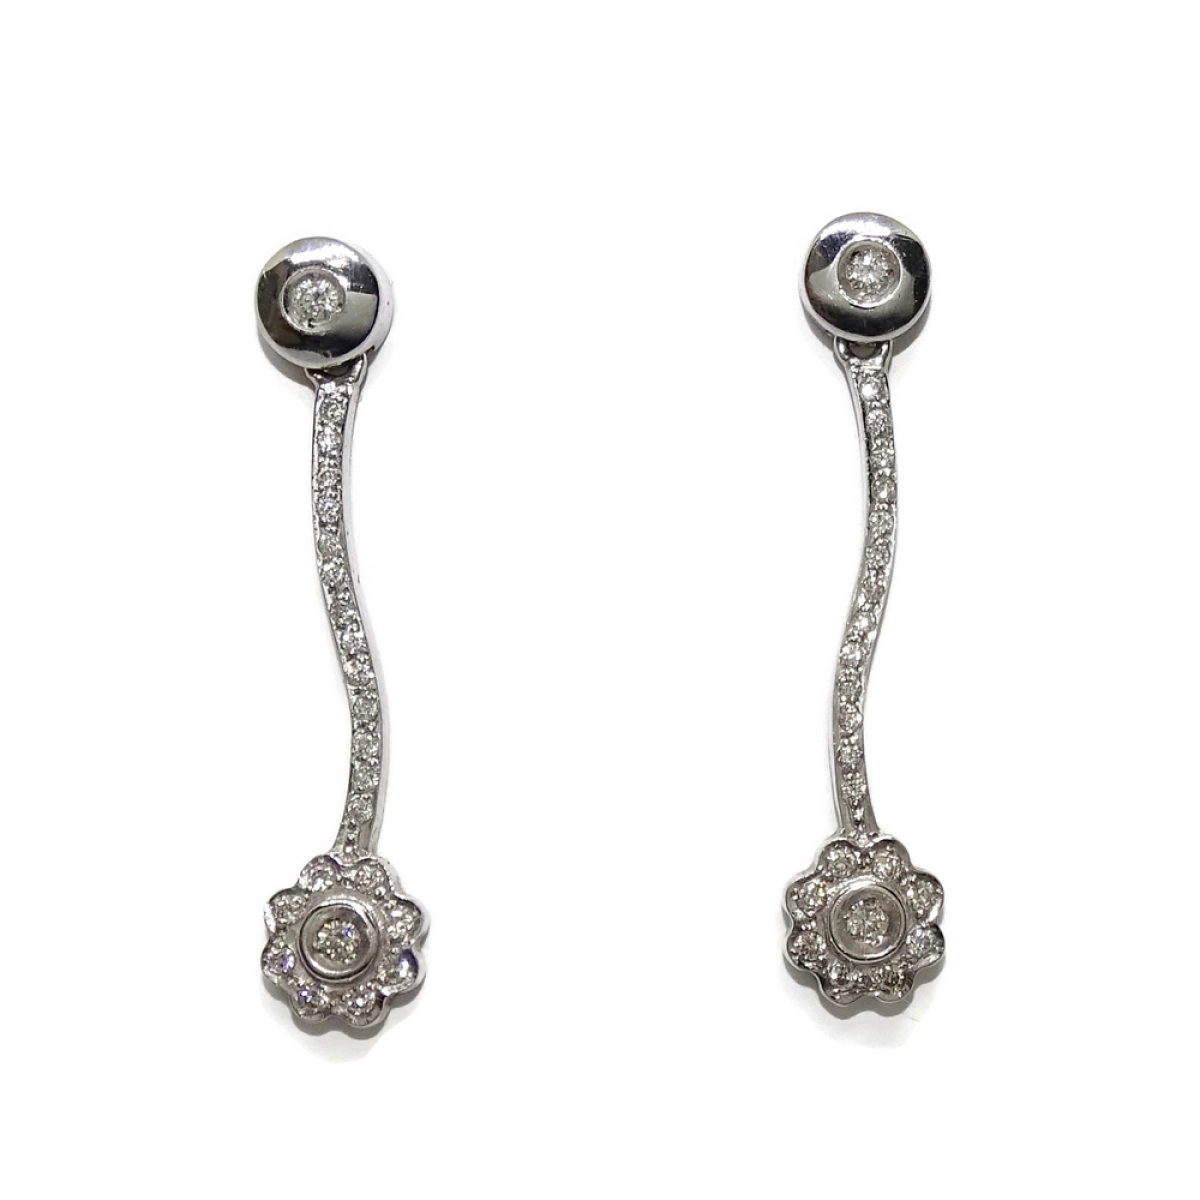 Precious 18k white gold long earrings with 0.53cts of diamonds Never say never